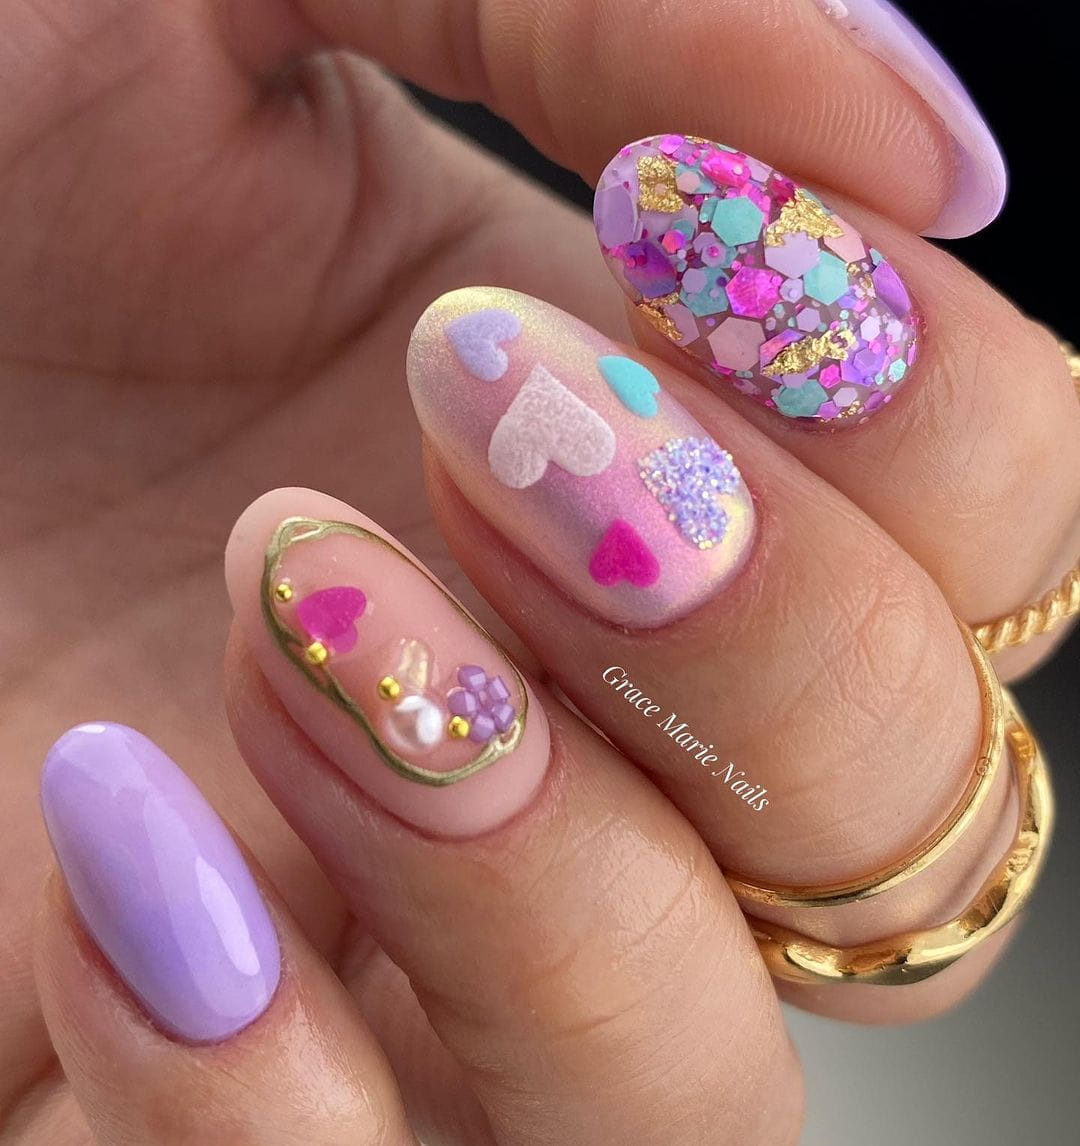 100 Of The Best Spring Inspired Nail Designs images 28